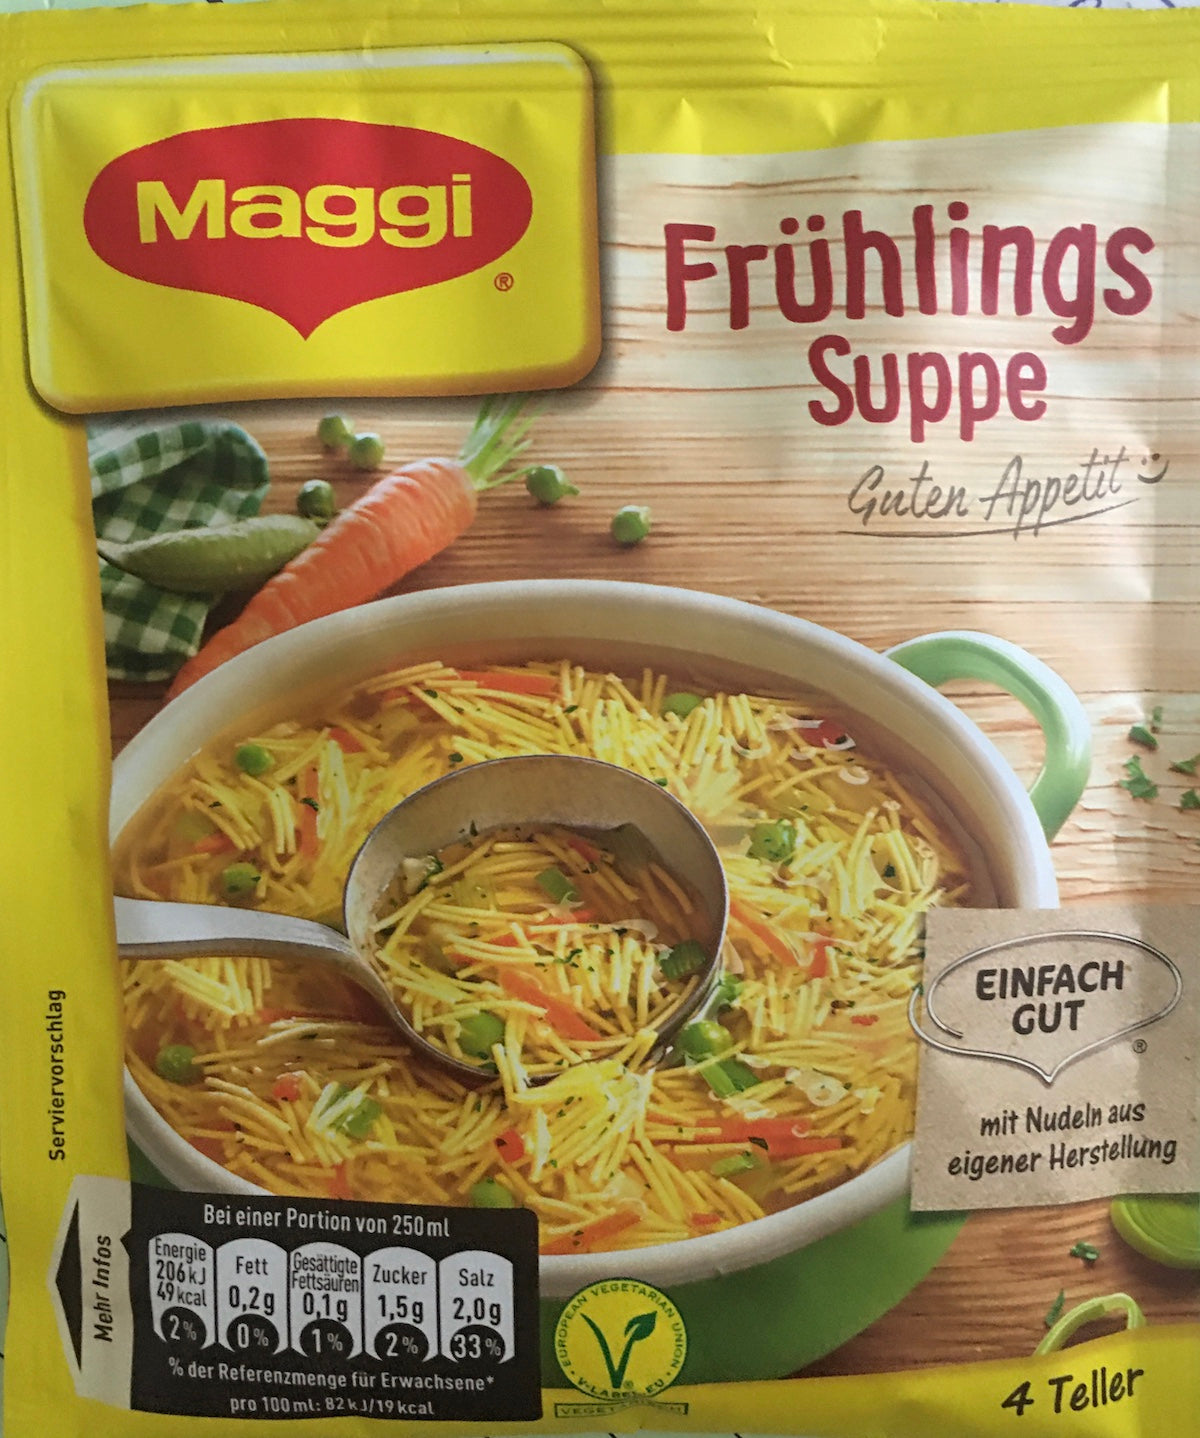 Maggi Spring Soup - Frühlingssuppe  Non-GMO, all natural